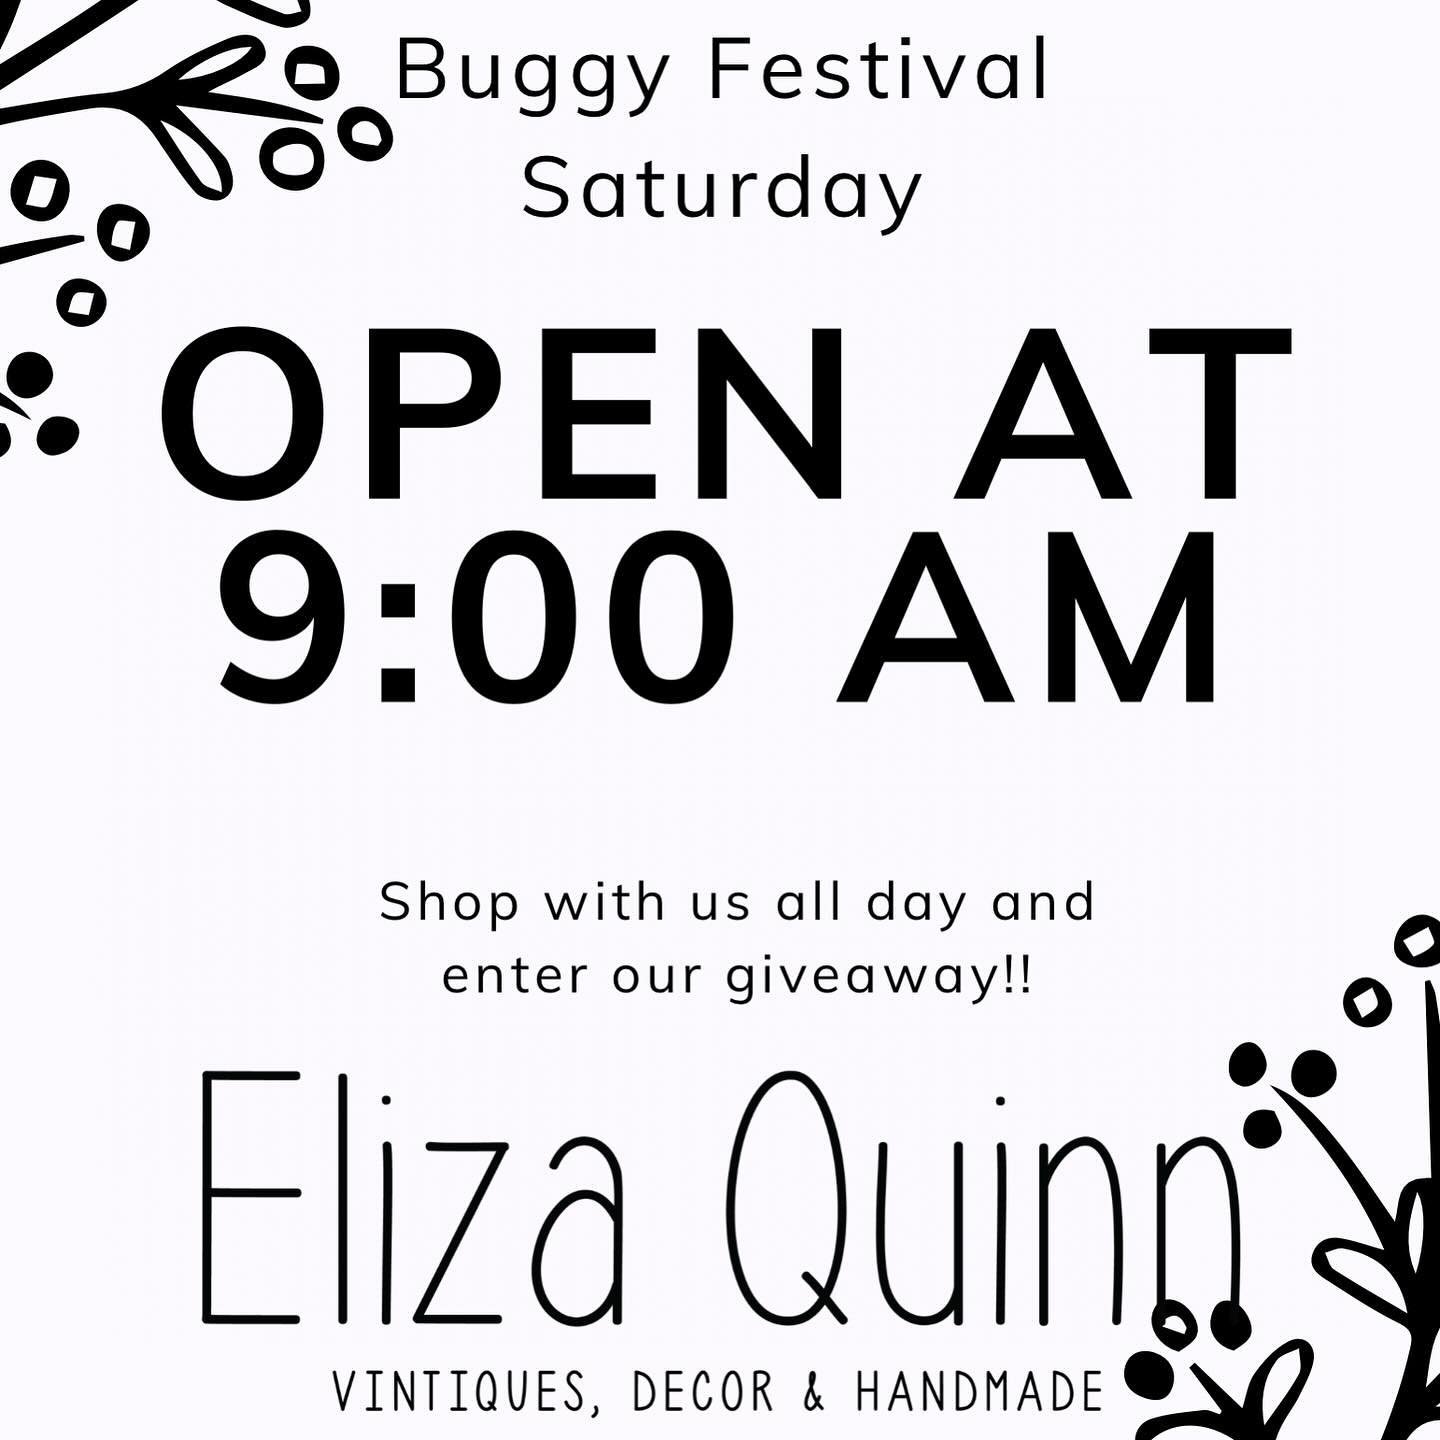 We open at 9:00 tomorrow along with the rest of the Buggy Festival! Come shop and enter our giveaway for a Mother&rsquo;s Day box! #farmhousedecor #weareturningtwo #primitivechic #farmhousefinds #barnfinds #homedecor #makeityours #smalltown #herewegr